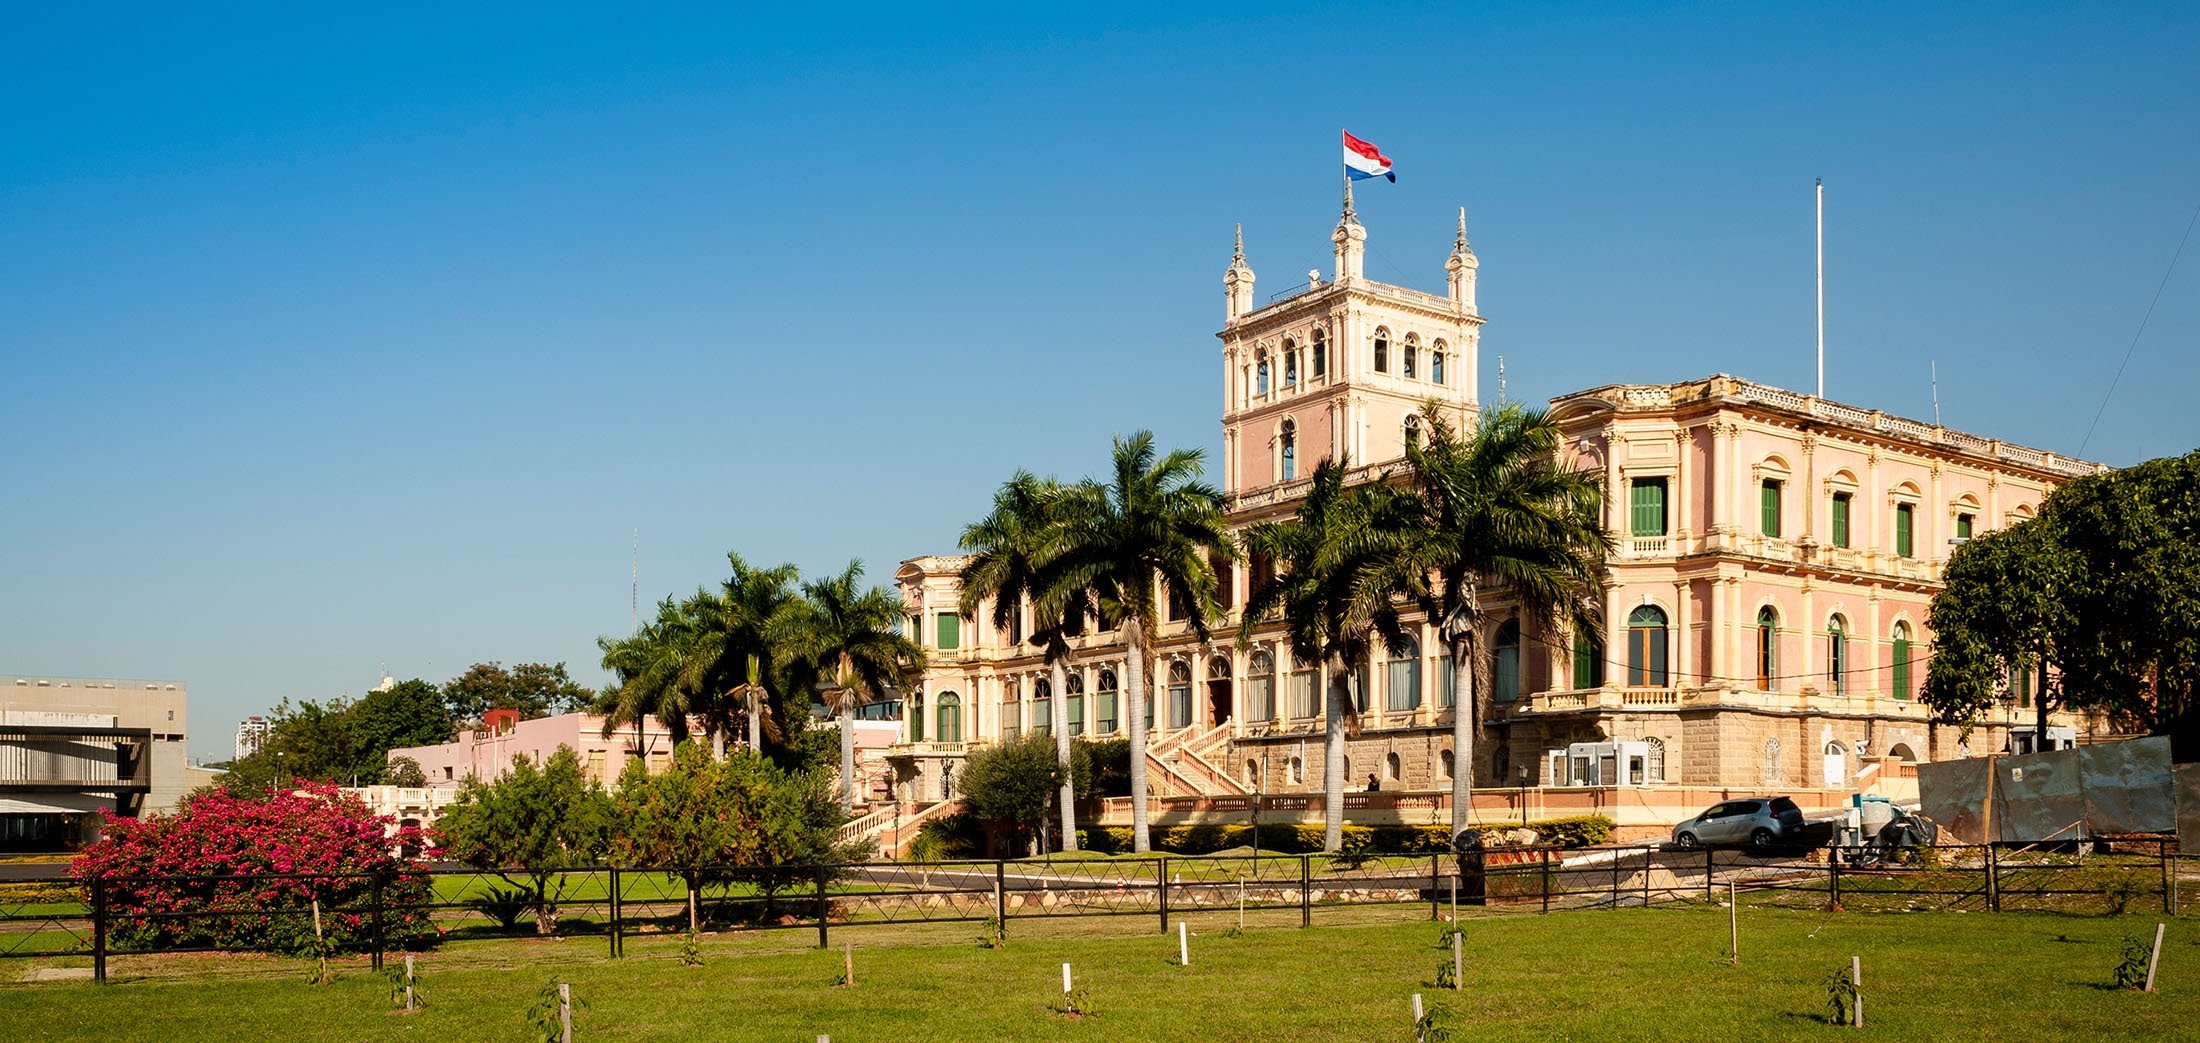 The Palacio de Lopez, a palace that serves as the seat of the President of Paraguay, can be seen in the capital Asuncion, Paraguay, July 15, 2018. (Shutterstock Photo)